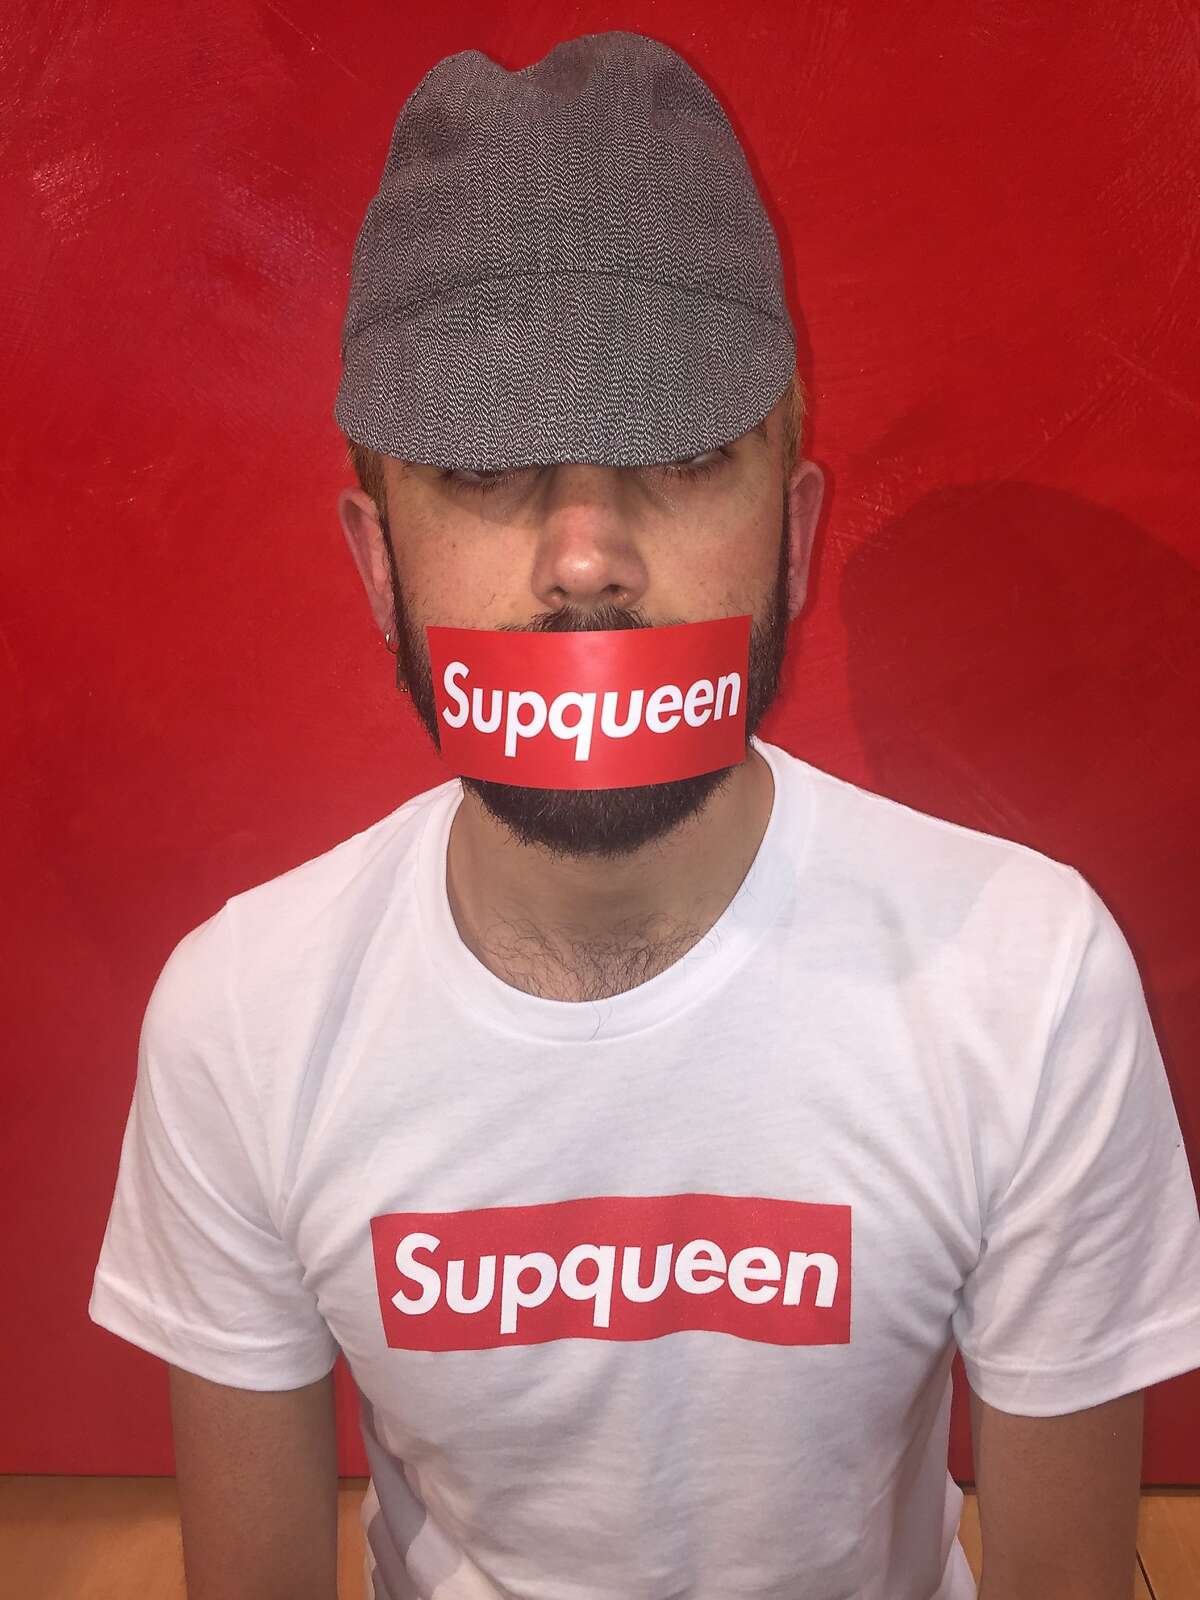 The "Supqueen" t-shirts by artist De Kwok are a take on the popular Supreme brand logo. $30 at Modern Appealing Clothing including t-shirt, sticker and button.